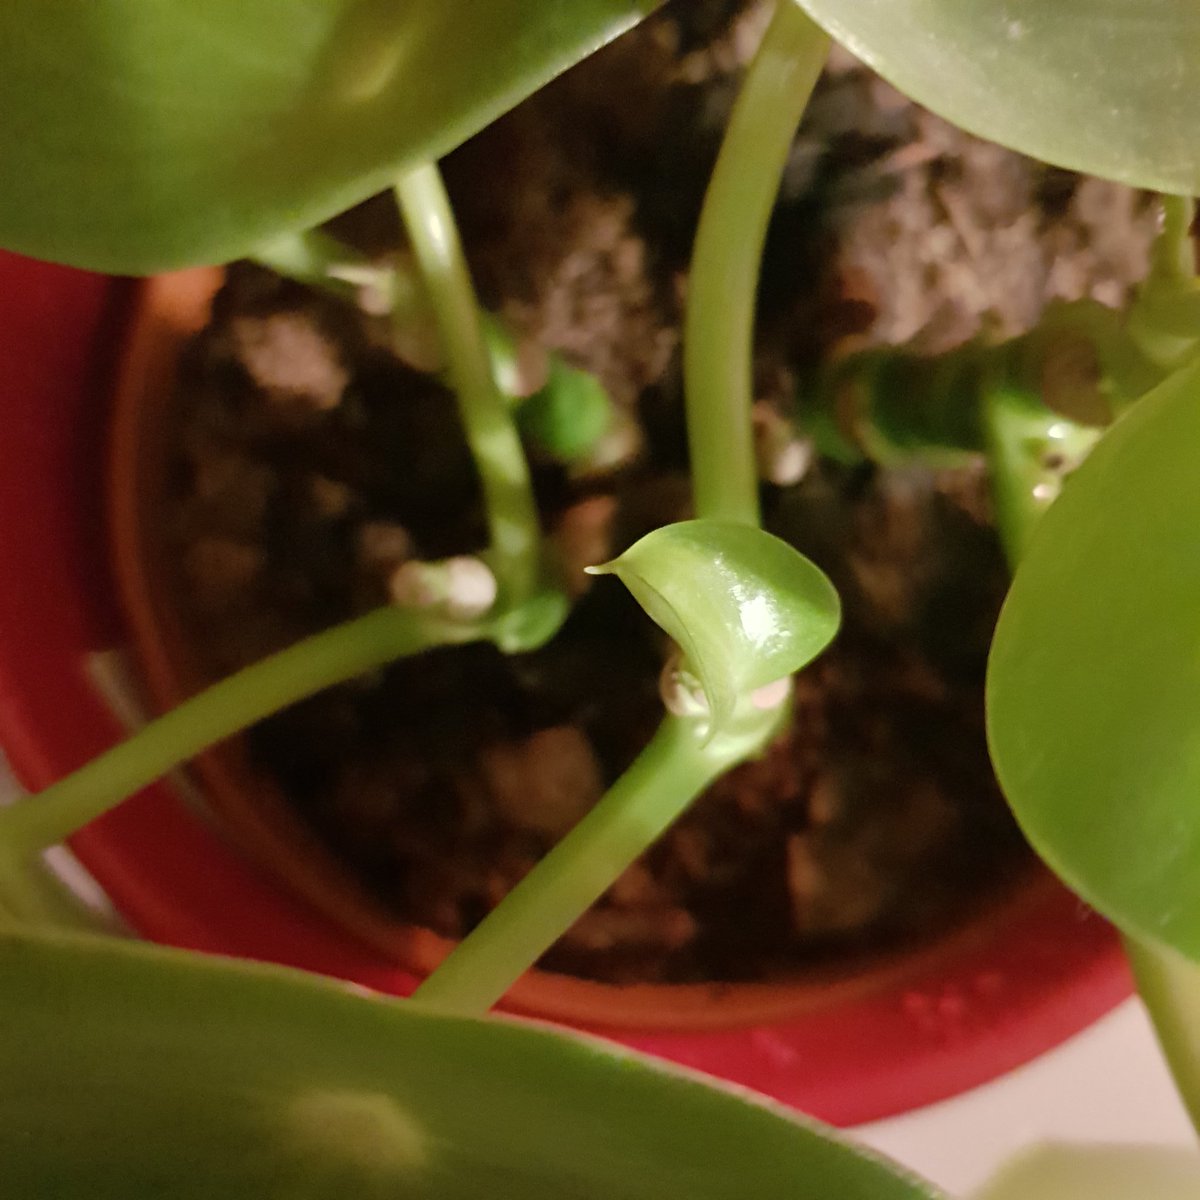 19.3.2020: three okay things • Mil developed a teeny tiny tail like a piglet • my peperomia is sprouting a new leaf • my socks have yoga cats on them  #threeokthings  #seekingsunshine